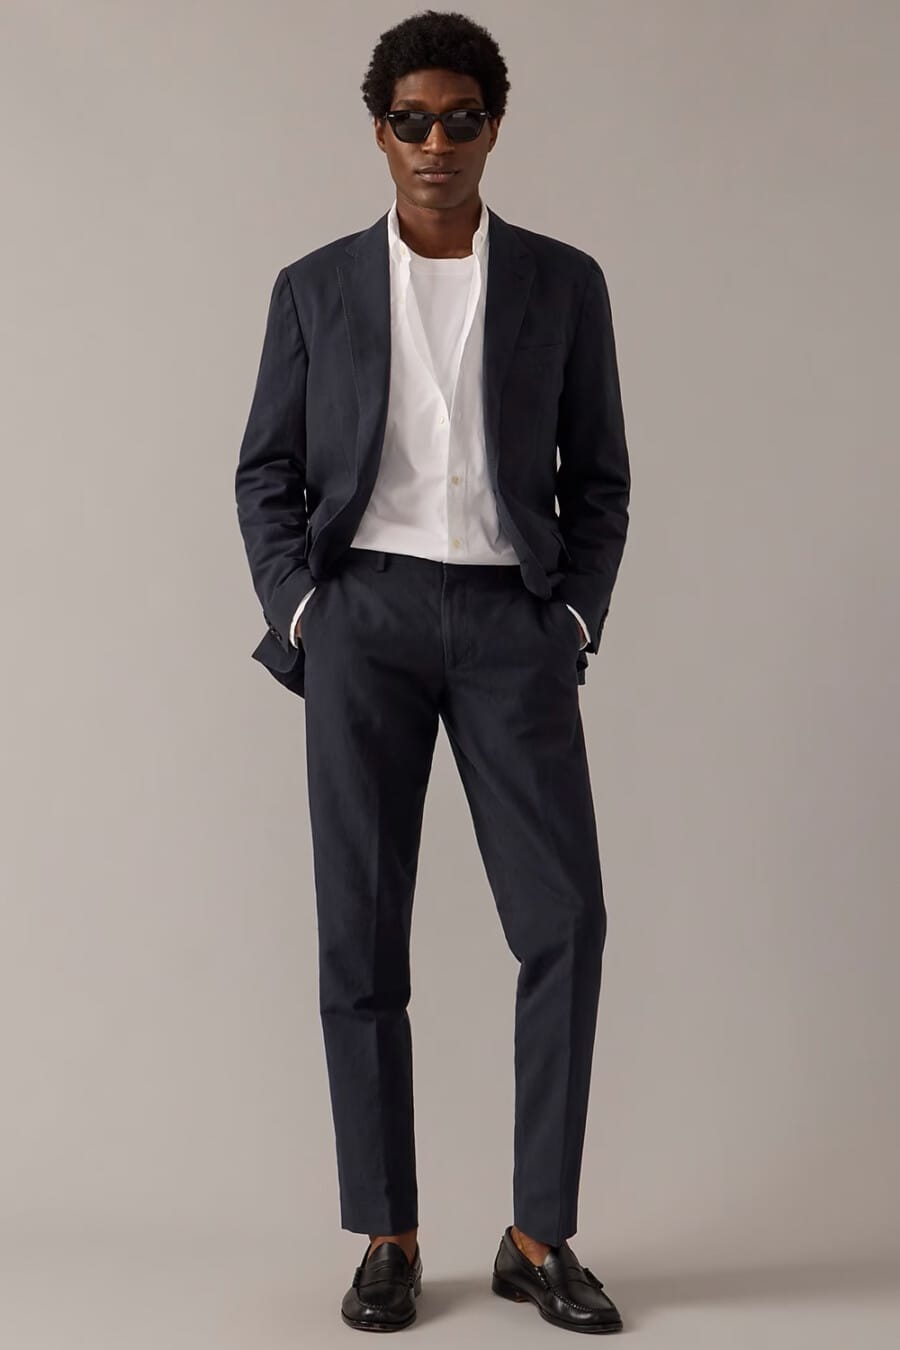 Men's navy suit, white T-shirt, white shirt, black sunglasses and black leather penny loafers worn sockless outfit